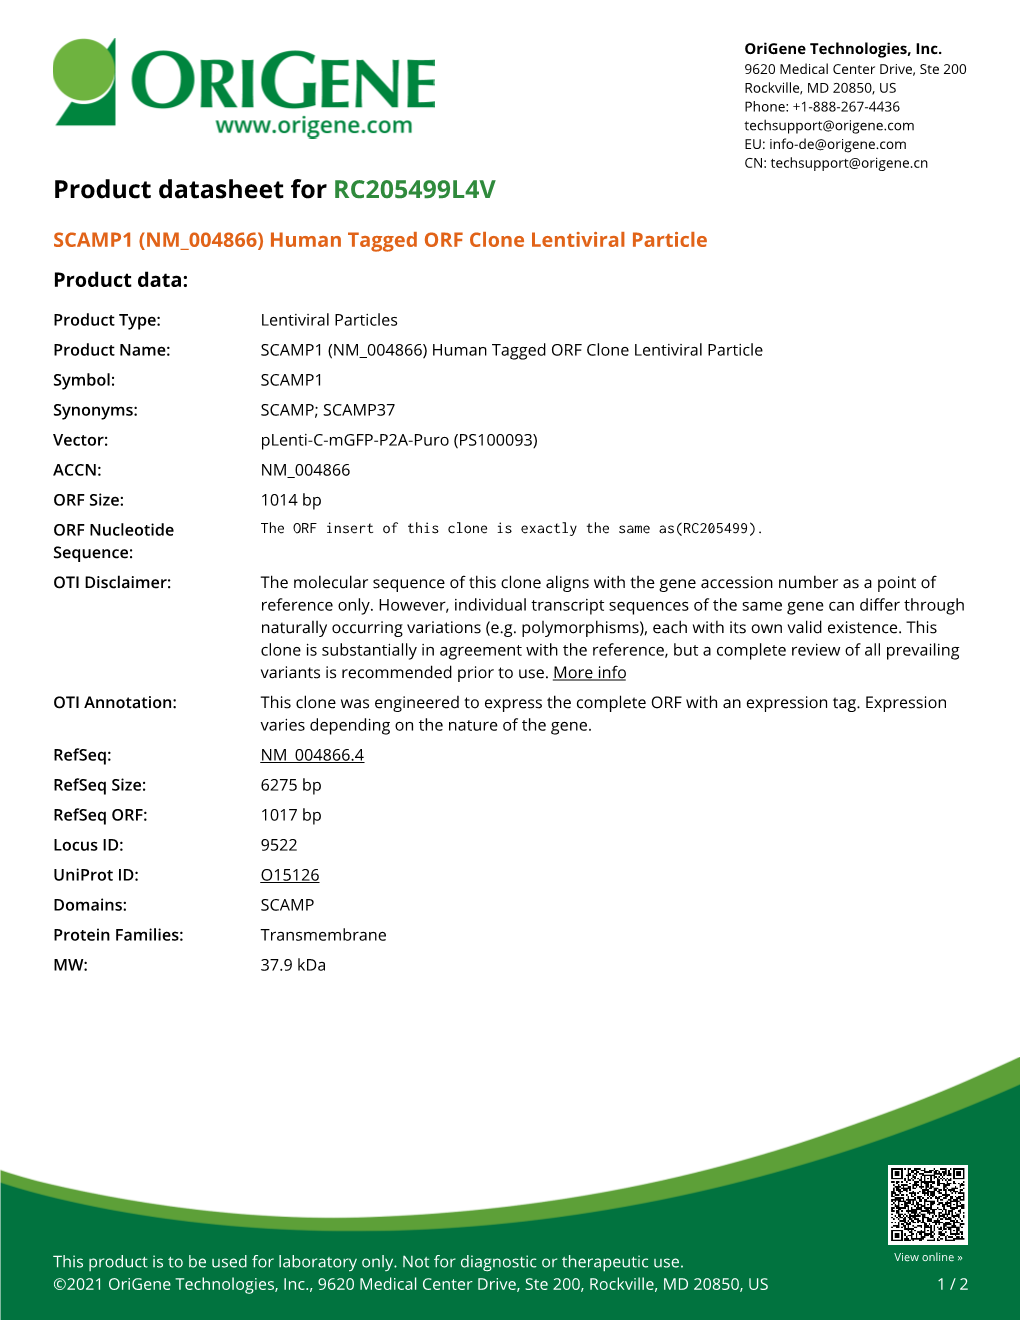 SCAMP1 (NM 004866) Human Tagged ORF Clone Lentiviral Particle Product Data